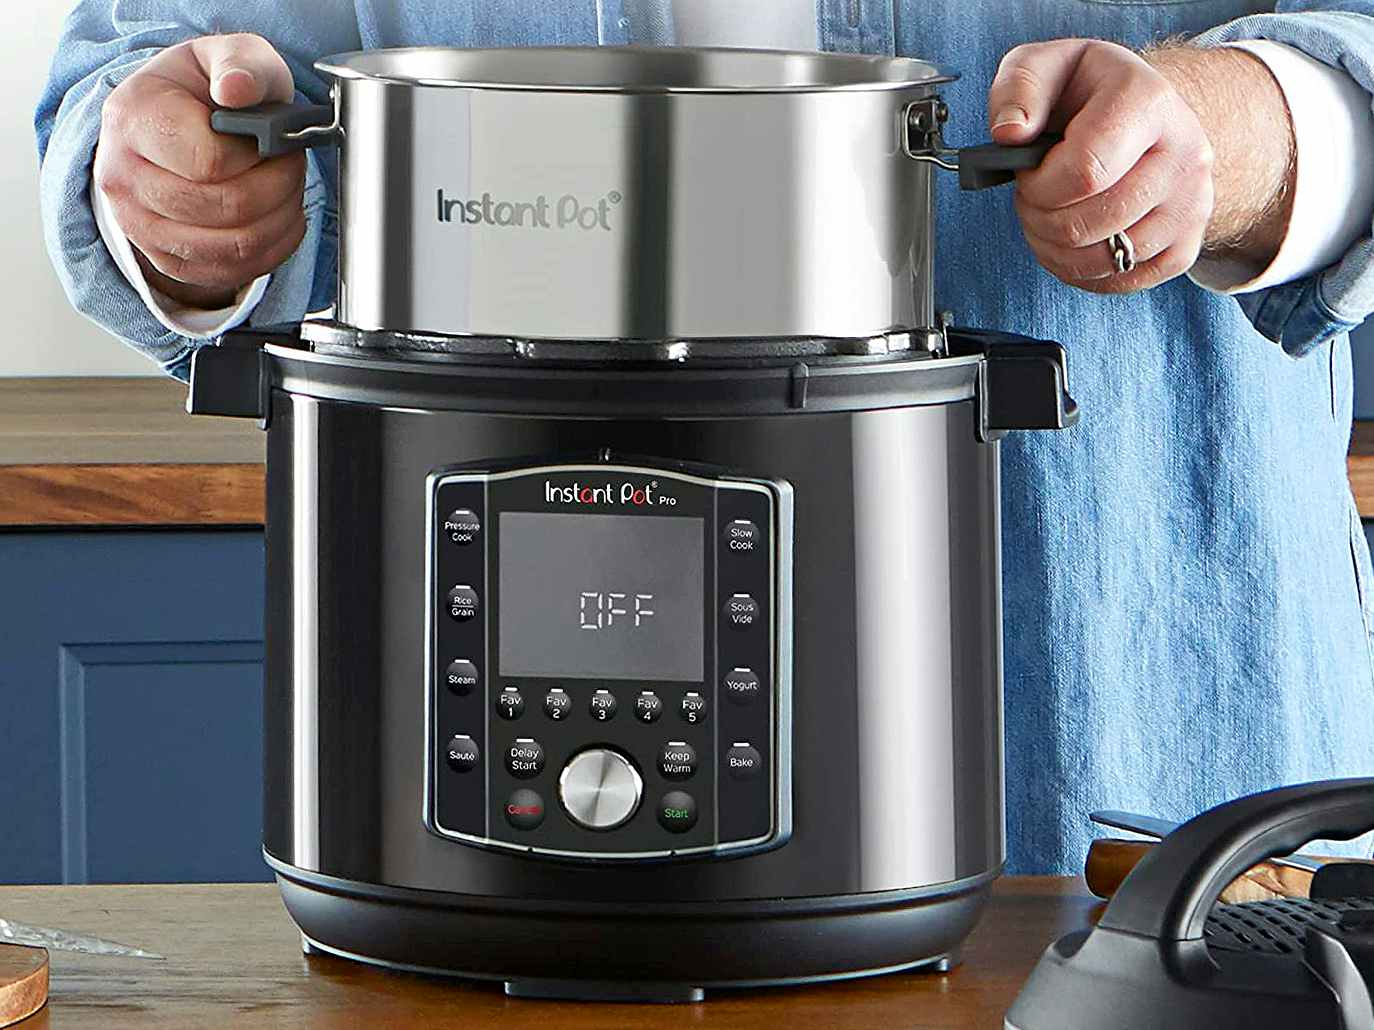 https://prod-cdn-thekrazycouponlady.imgix.net/wp-content/uploads/2018/04/how-to-use-instant-pot-person-pro-1667490437-1667490437.jpg?auto=format&fit=fill&q=25